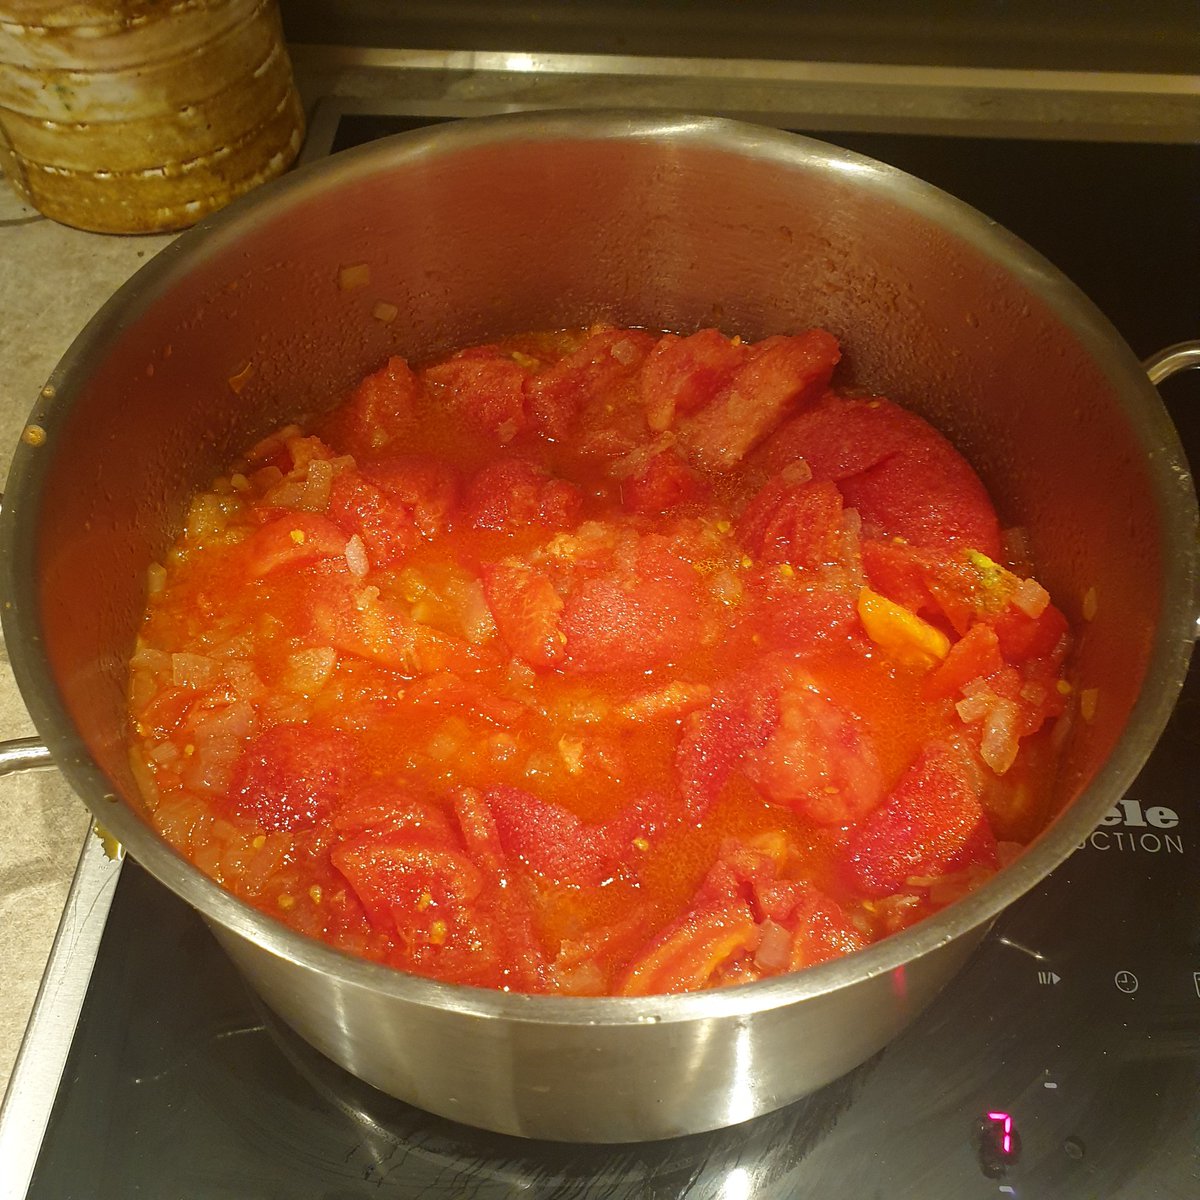 tomatoes look like this nowonions look like this nowcombinemix and salt top liberally. heat to just enough to get a simmer